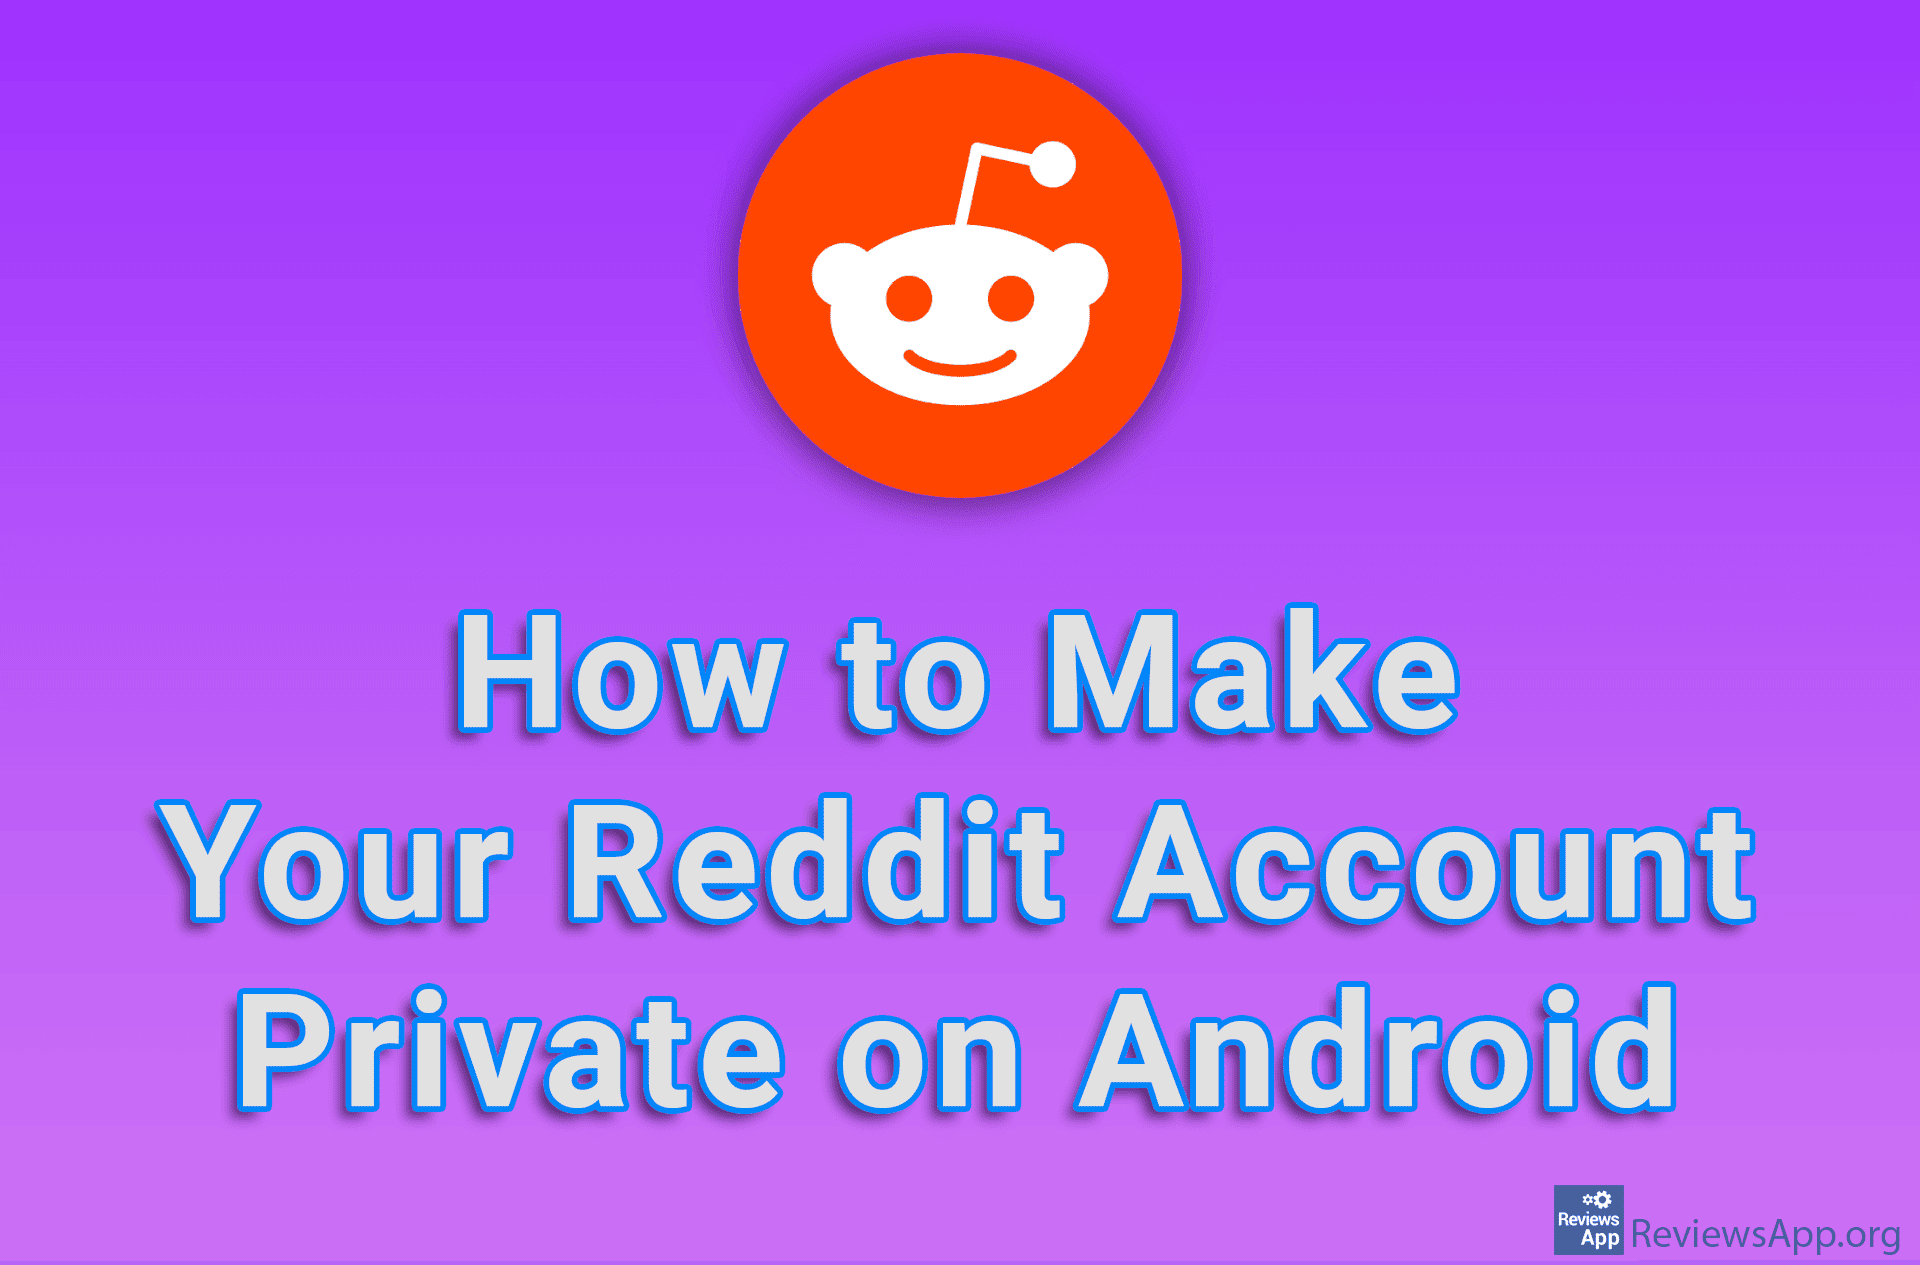 How to Make Your Reddit Account Private on Android